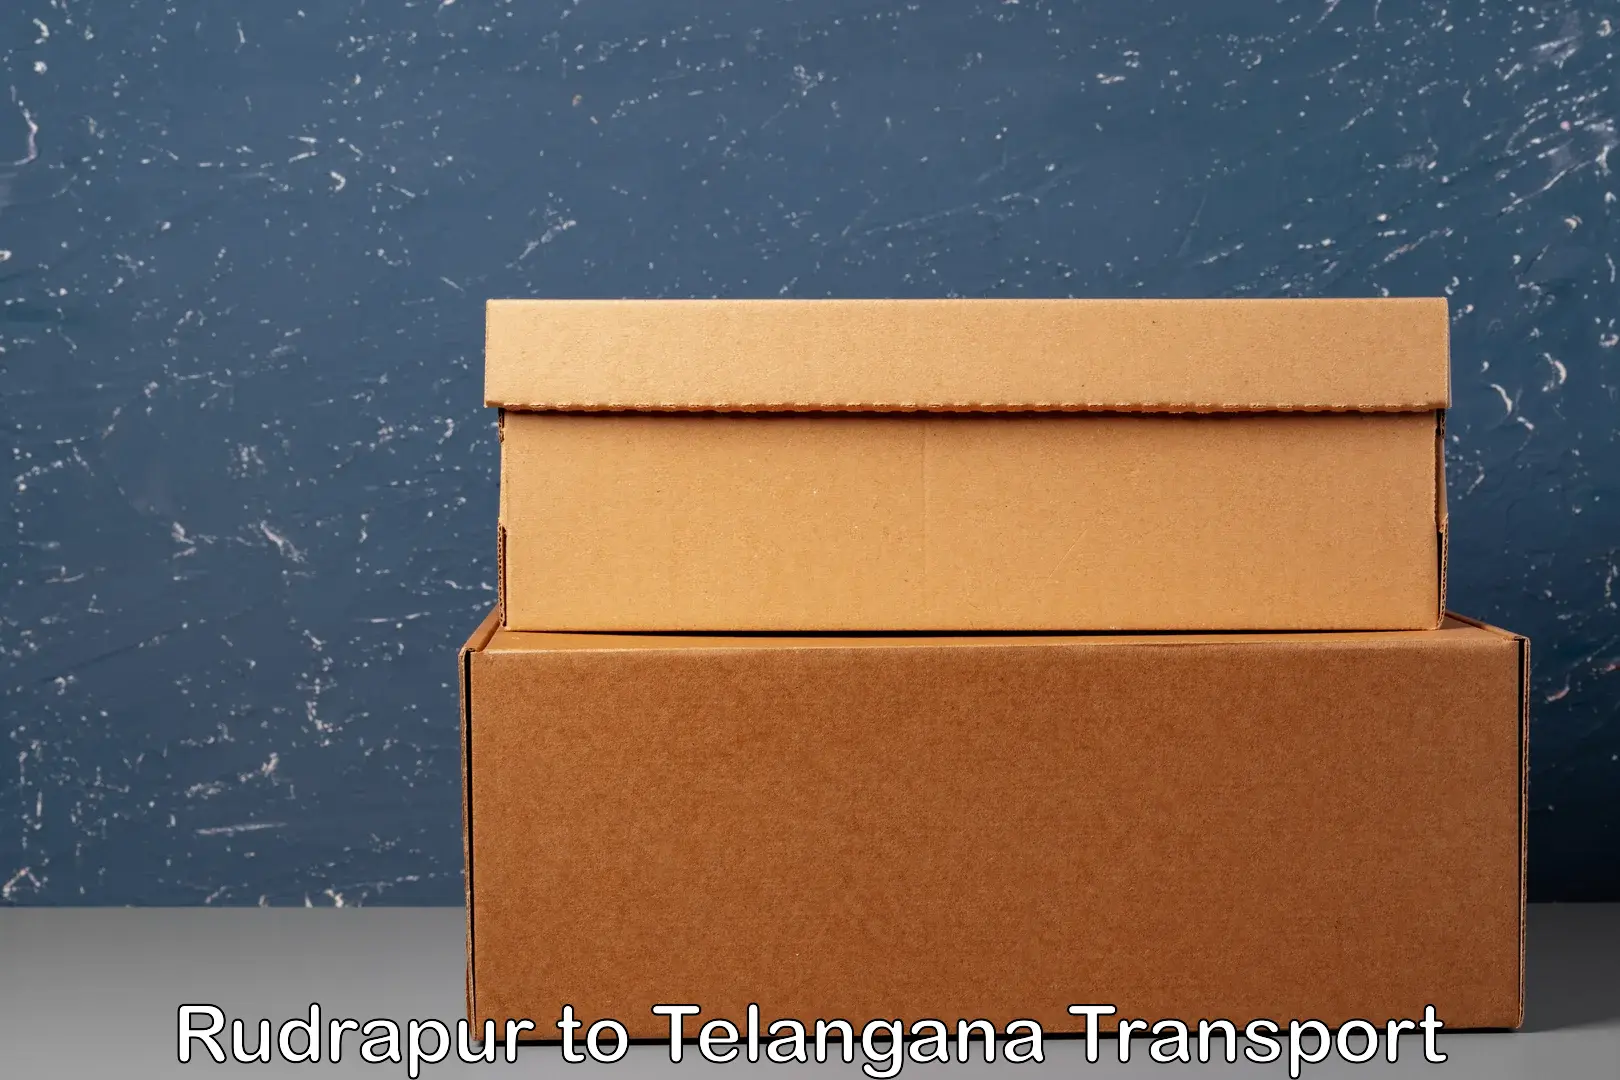 Commercial transport service Rudrapur to Gangadhara